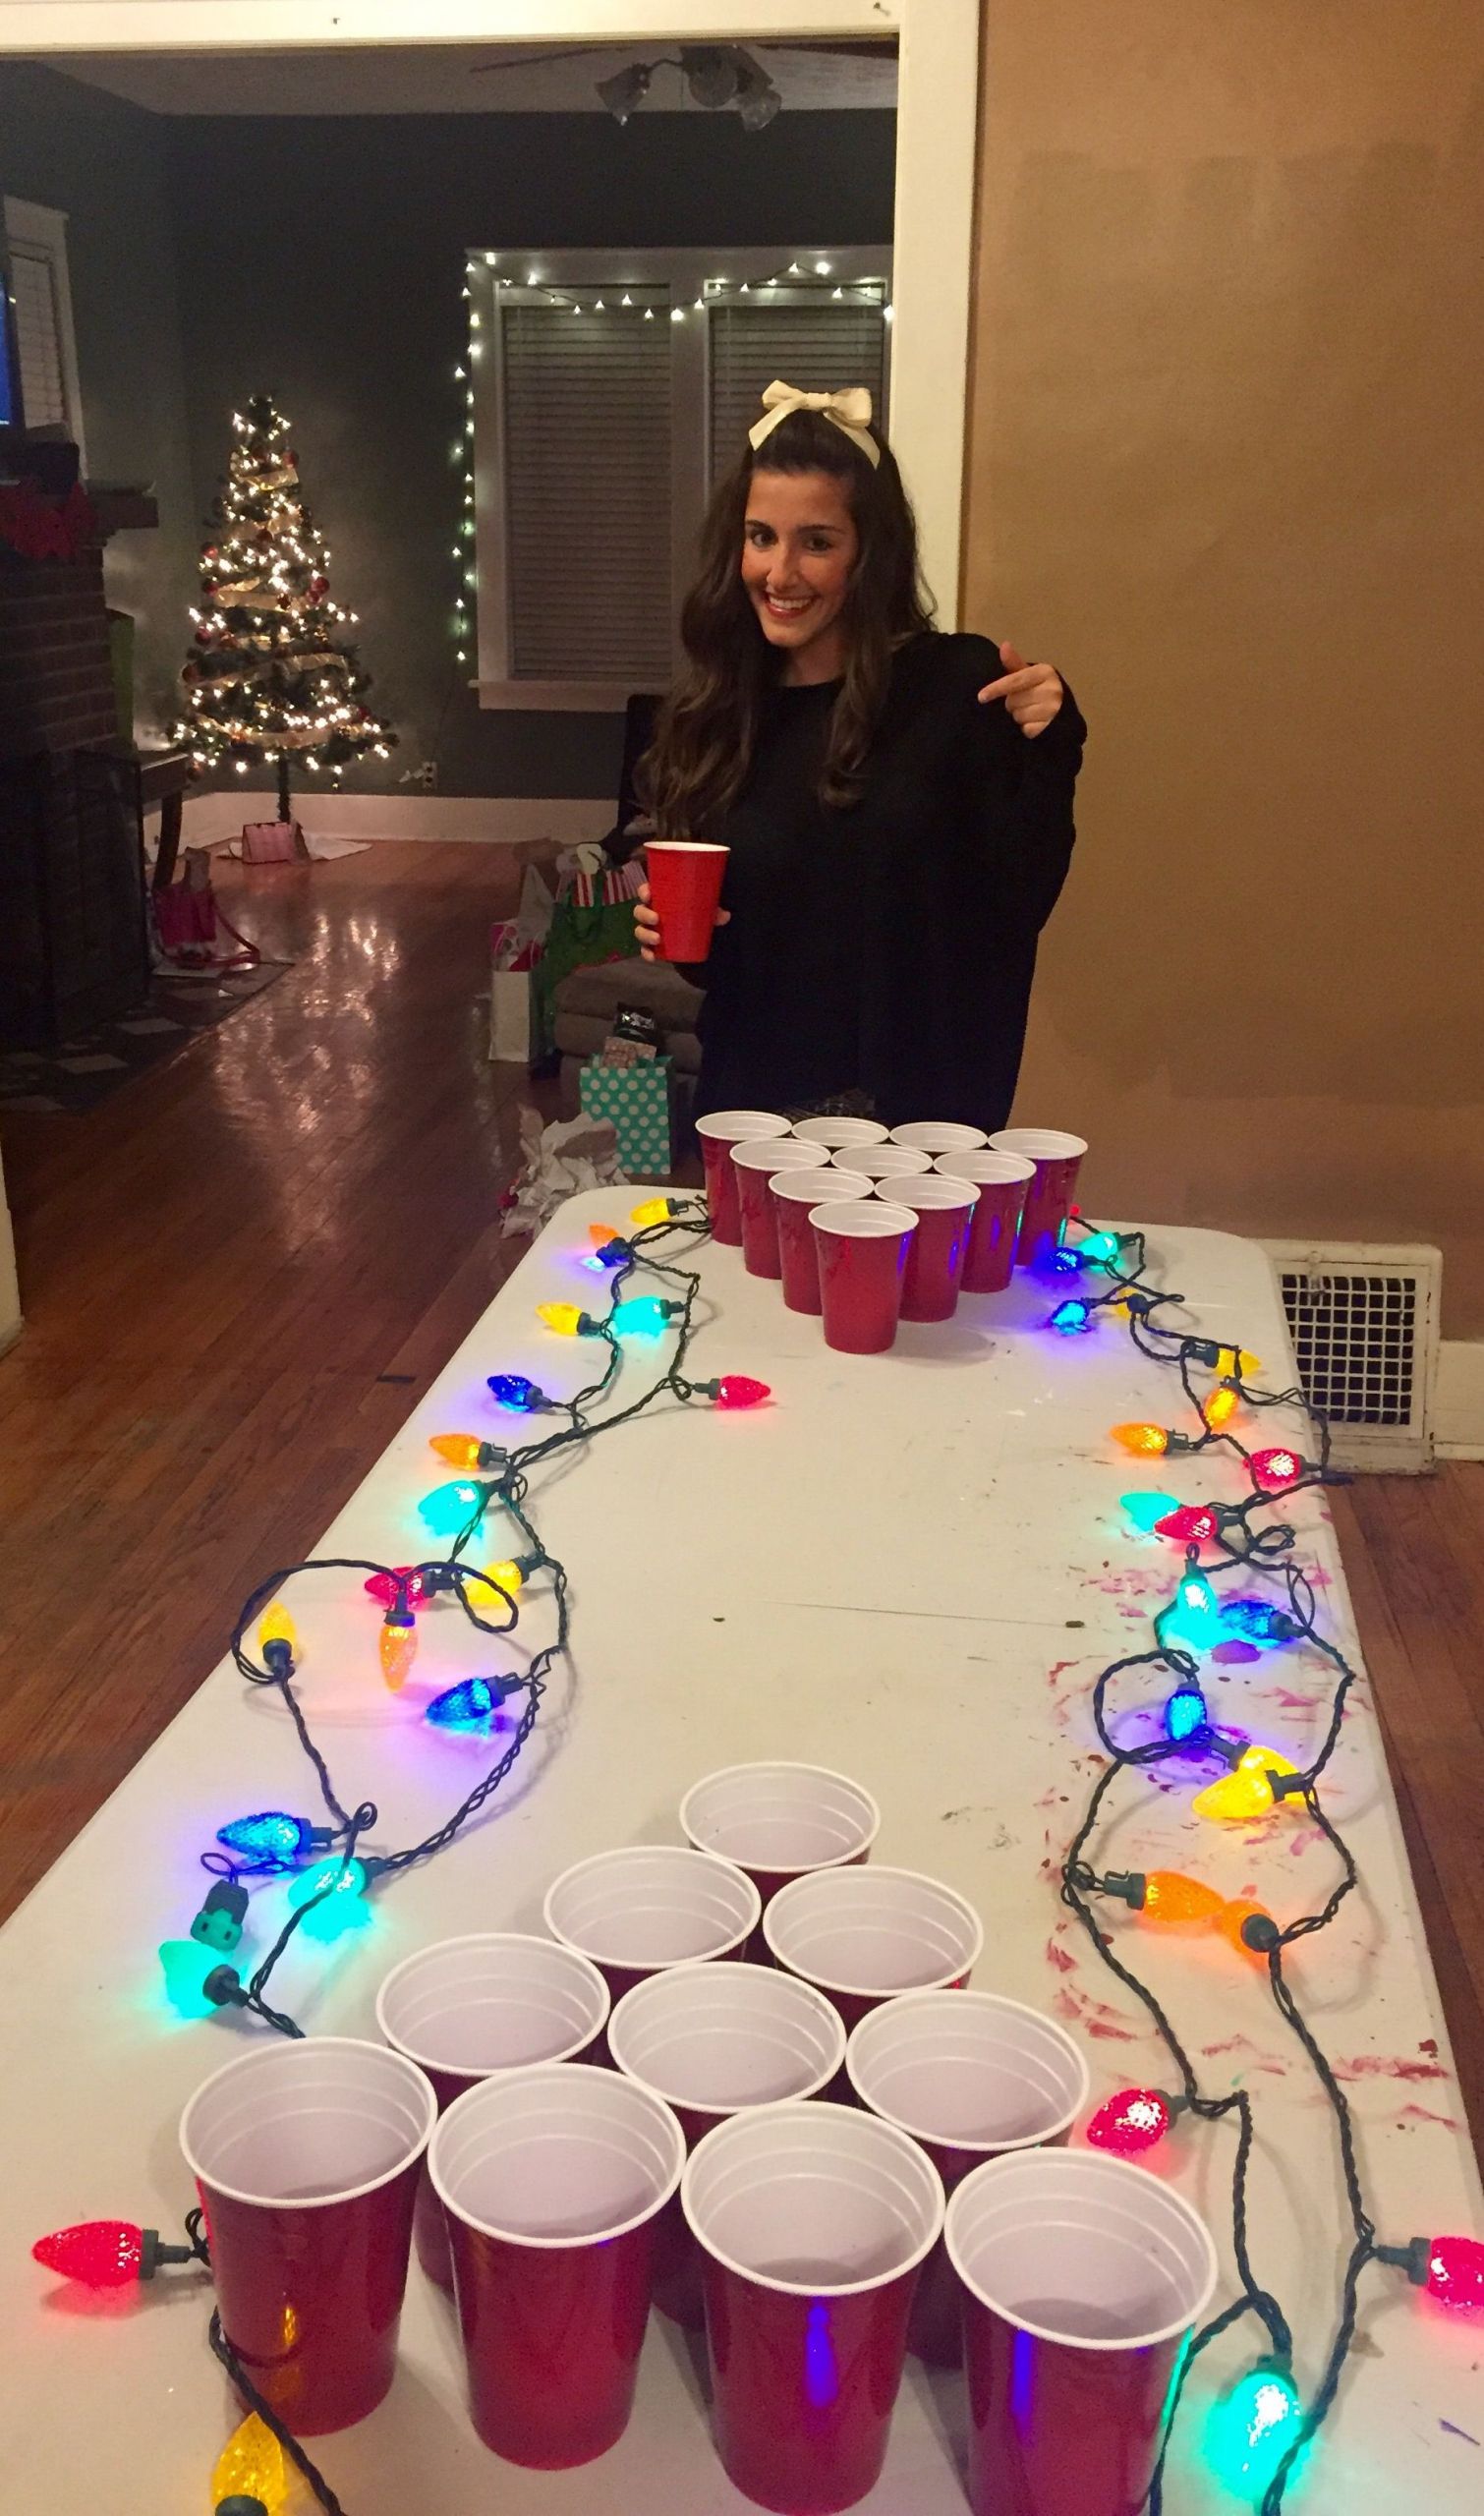 Christmas Party Ideas For Adults
 Making the beer pong table festive TSM